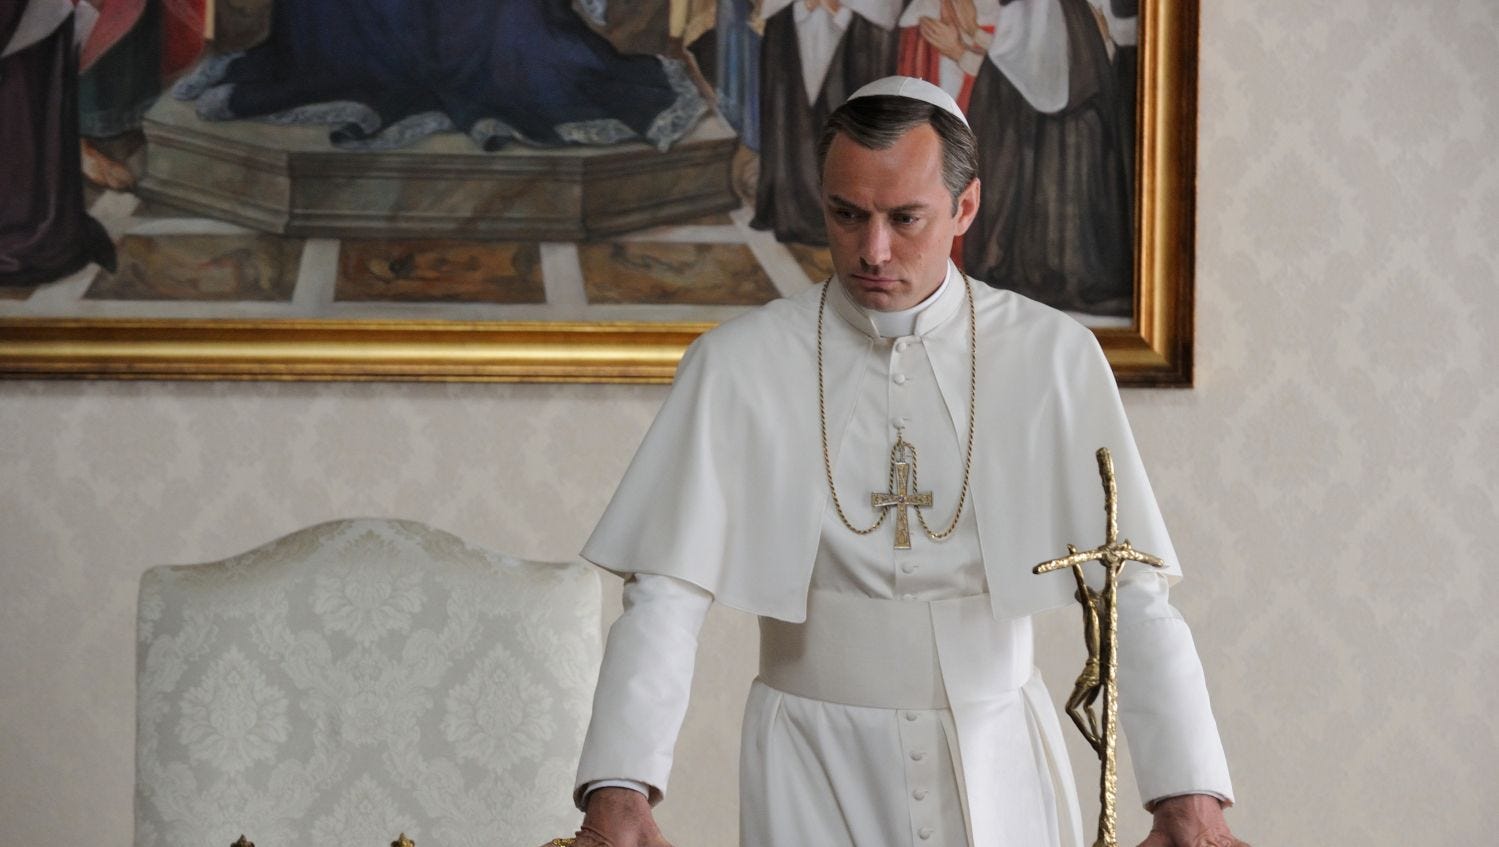 Geologi undersøgelse skandale 'The Young Pope' review: Jude Law's 'Pope' is HBO's odd, eccentric fever  dream